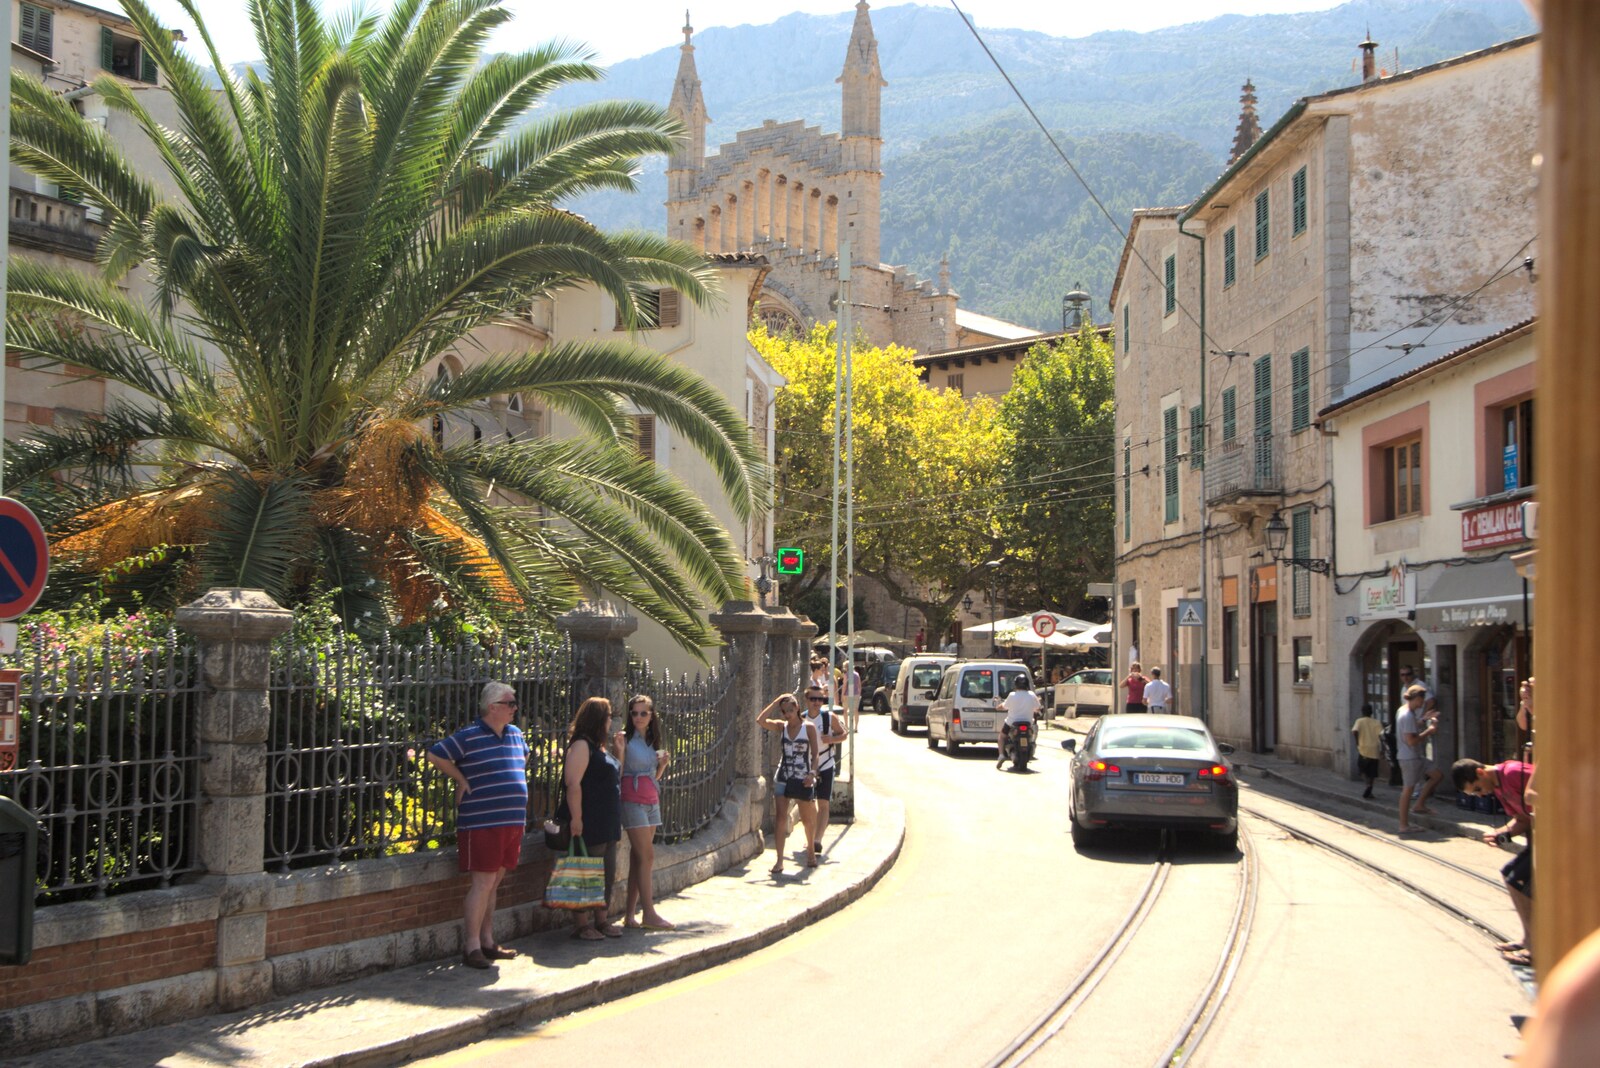 The view back to Sóller from A Tram Trip to Port Soller, Mallorca - 18th August 2011